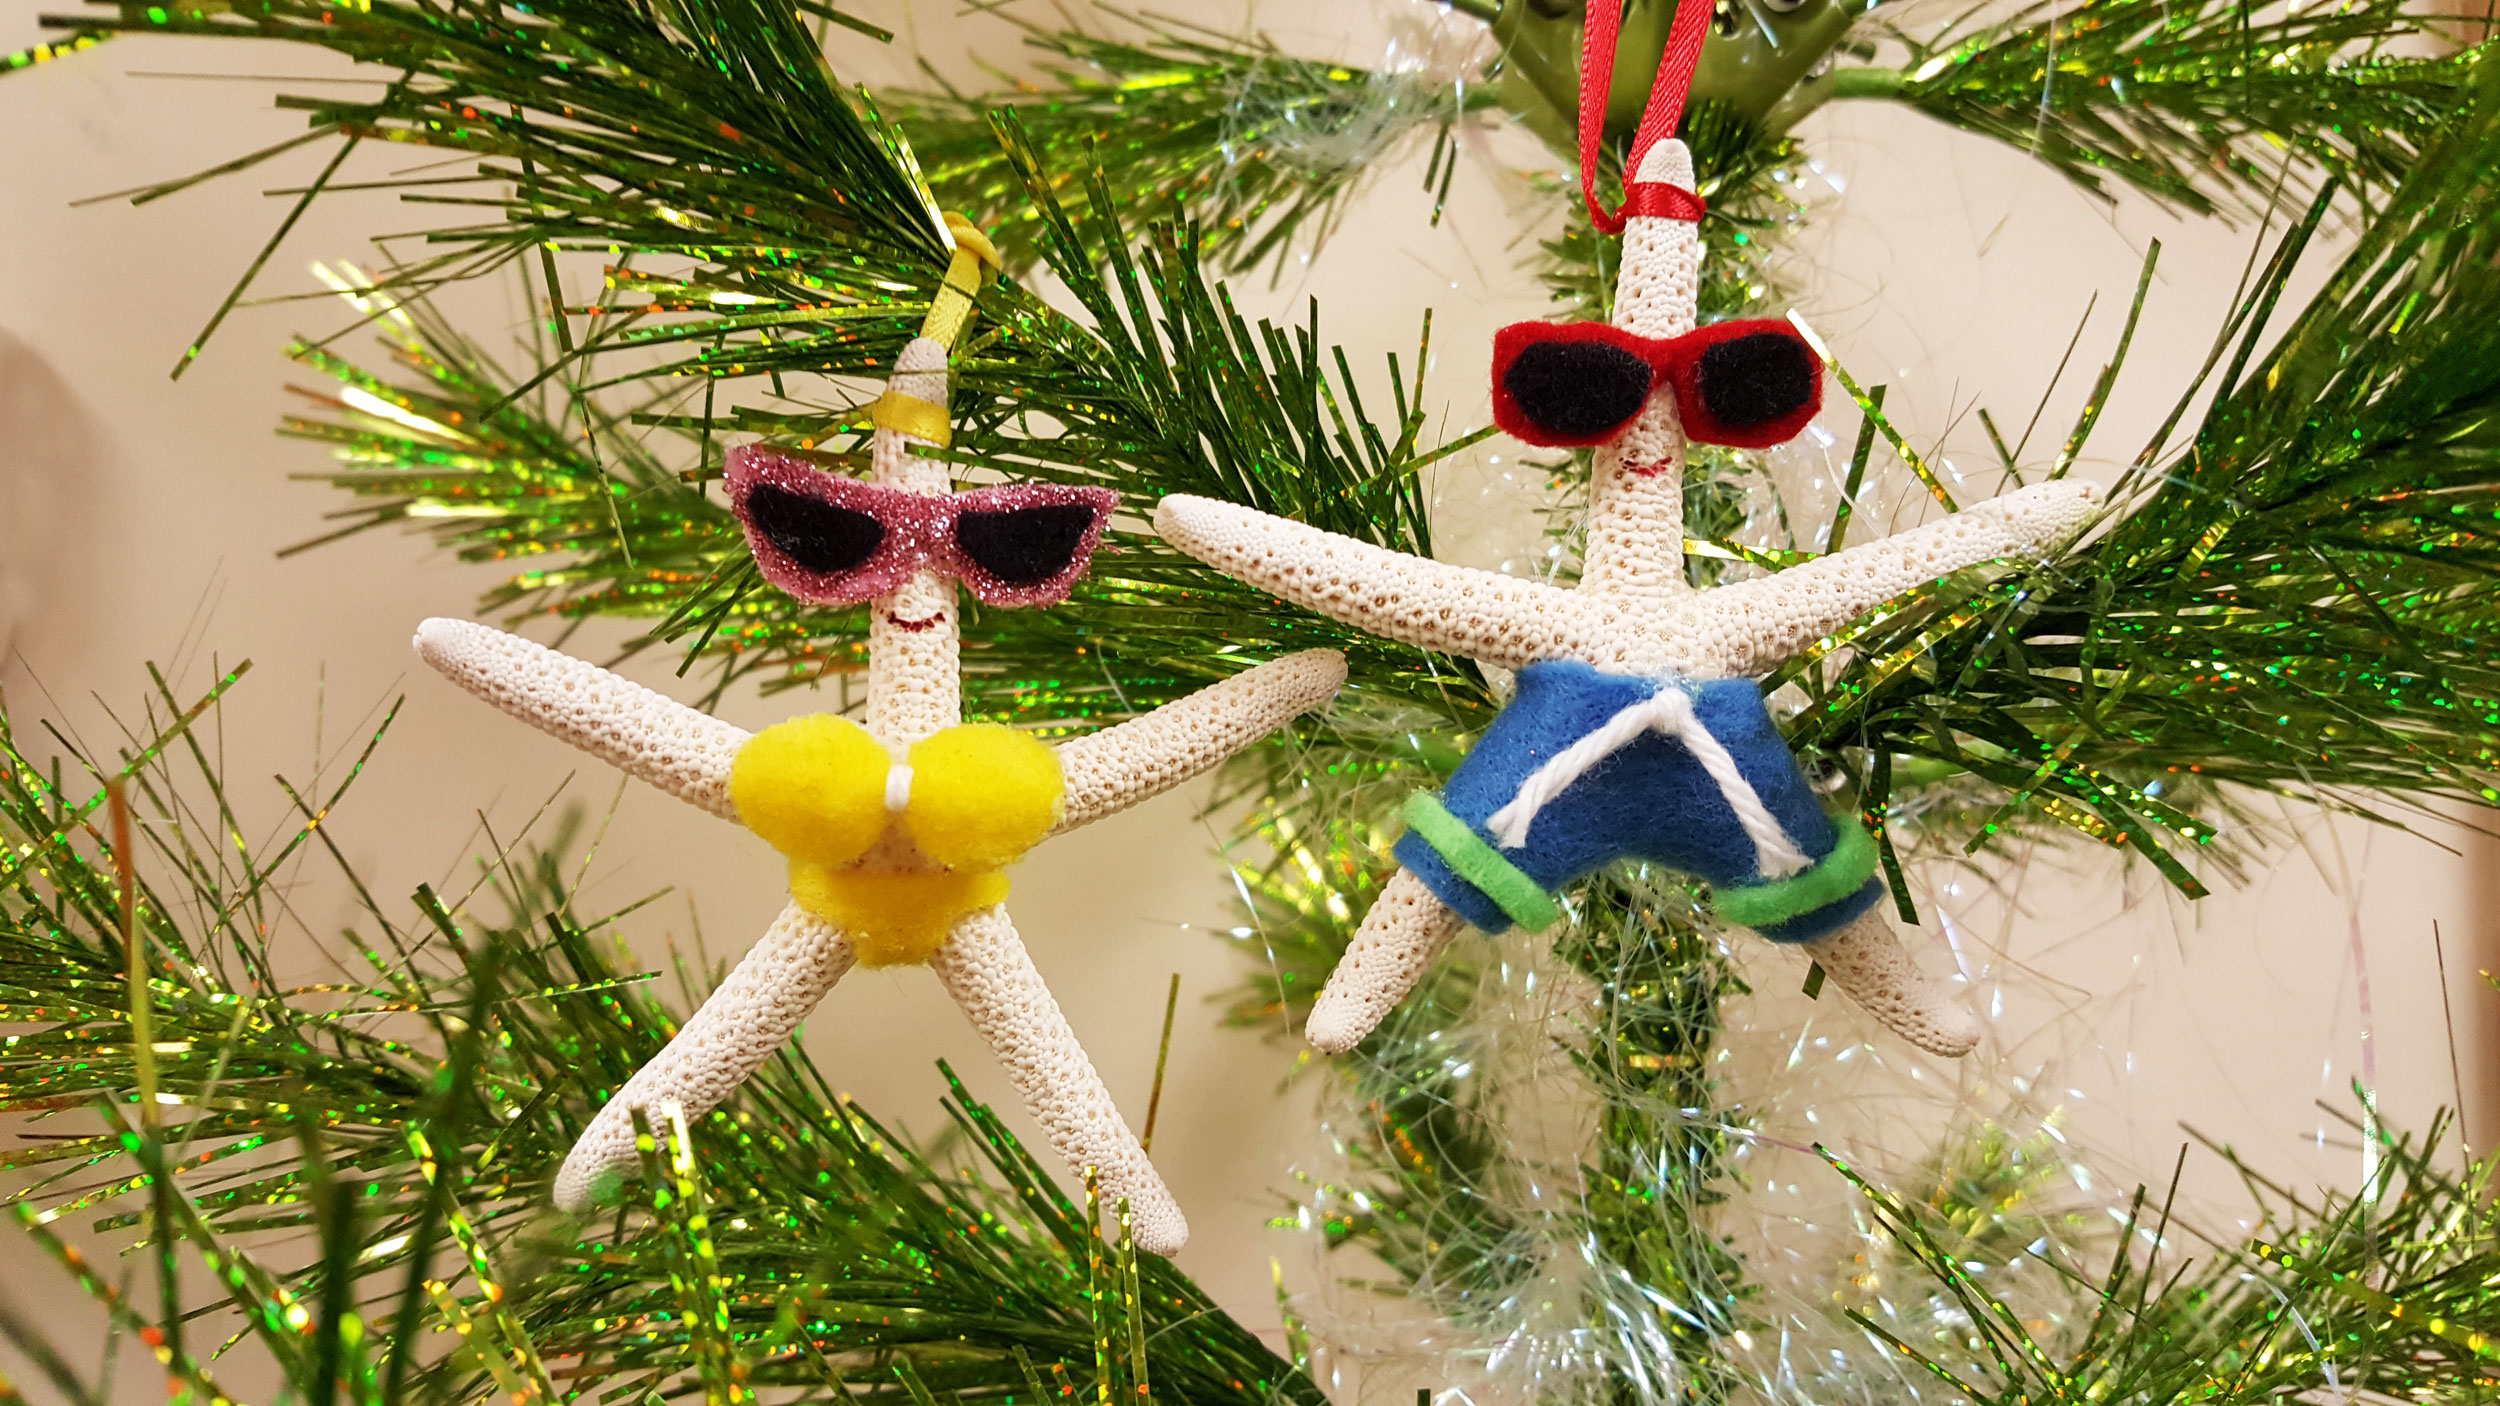 Completed starfish ornaments hanging on green Christmas tree | OrnamentShop.com